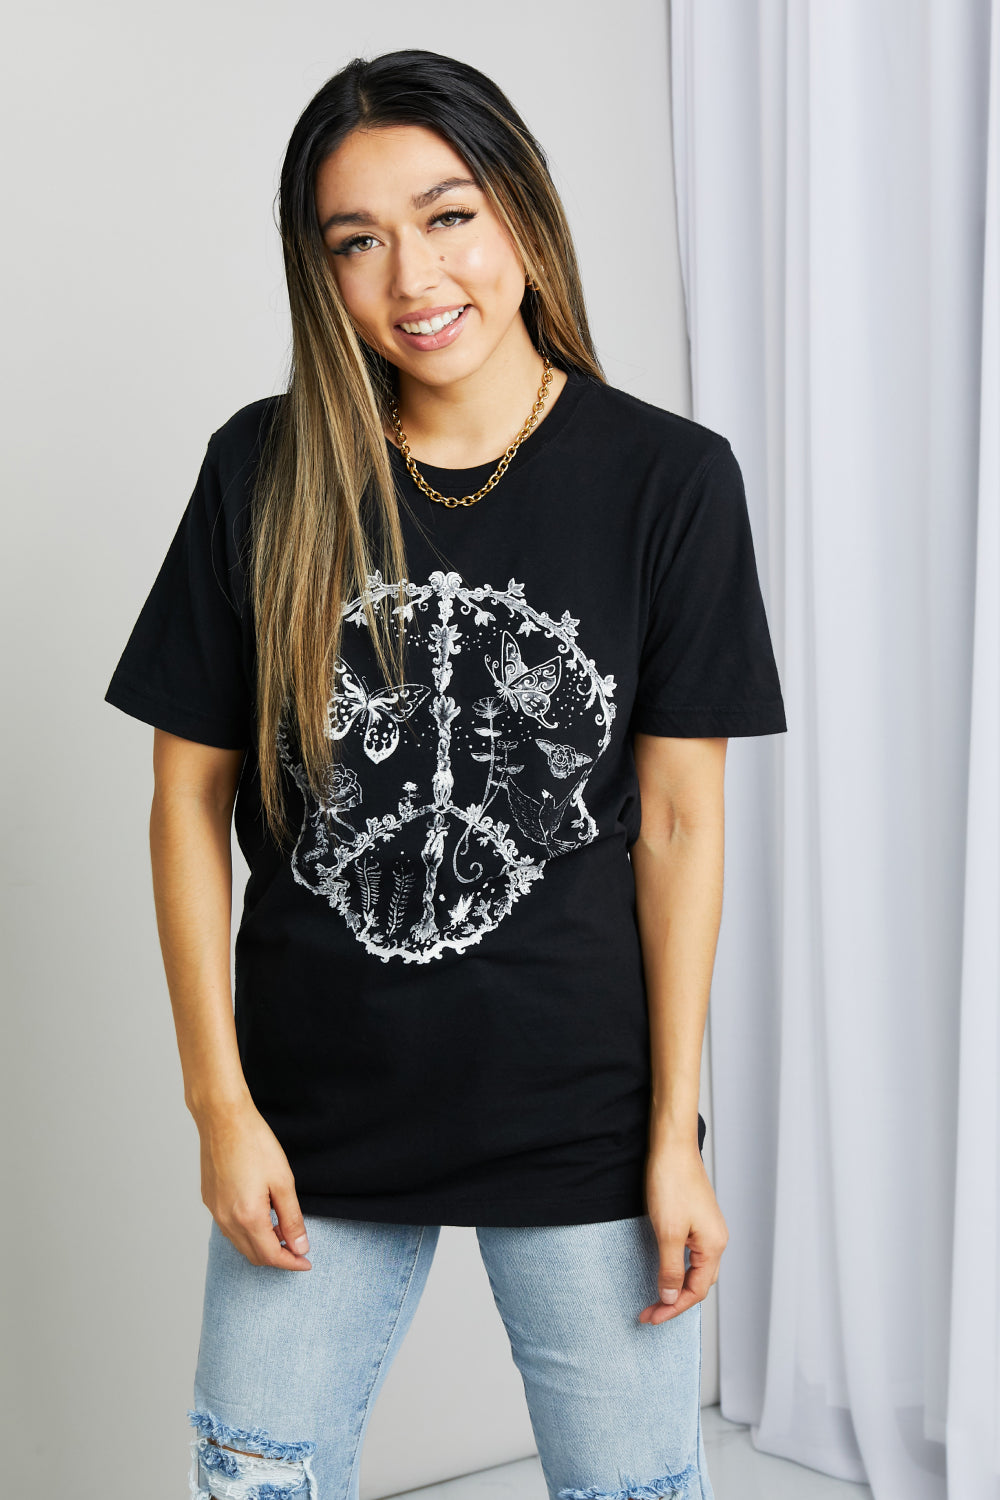 Peace Butterfly Graphic Tee Shirt